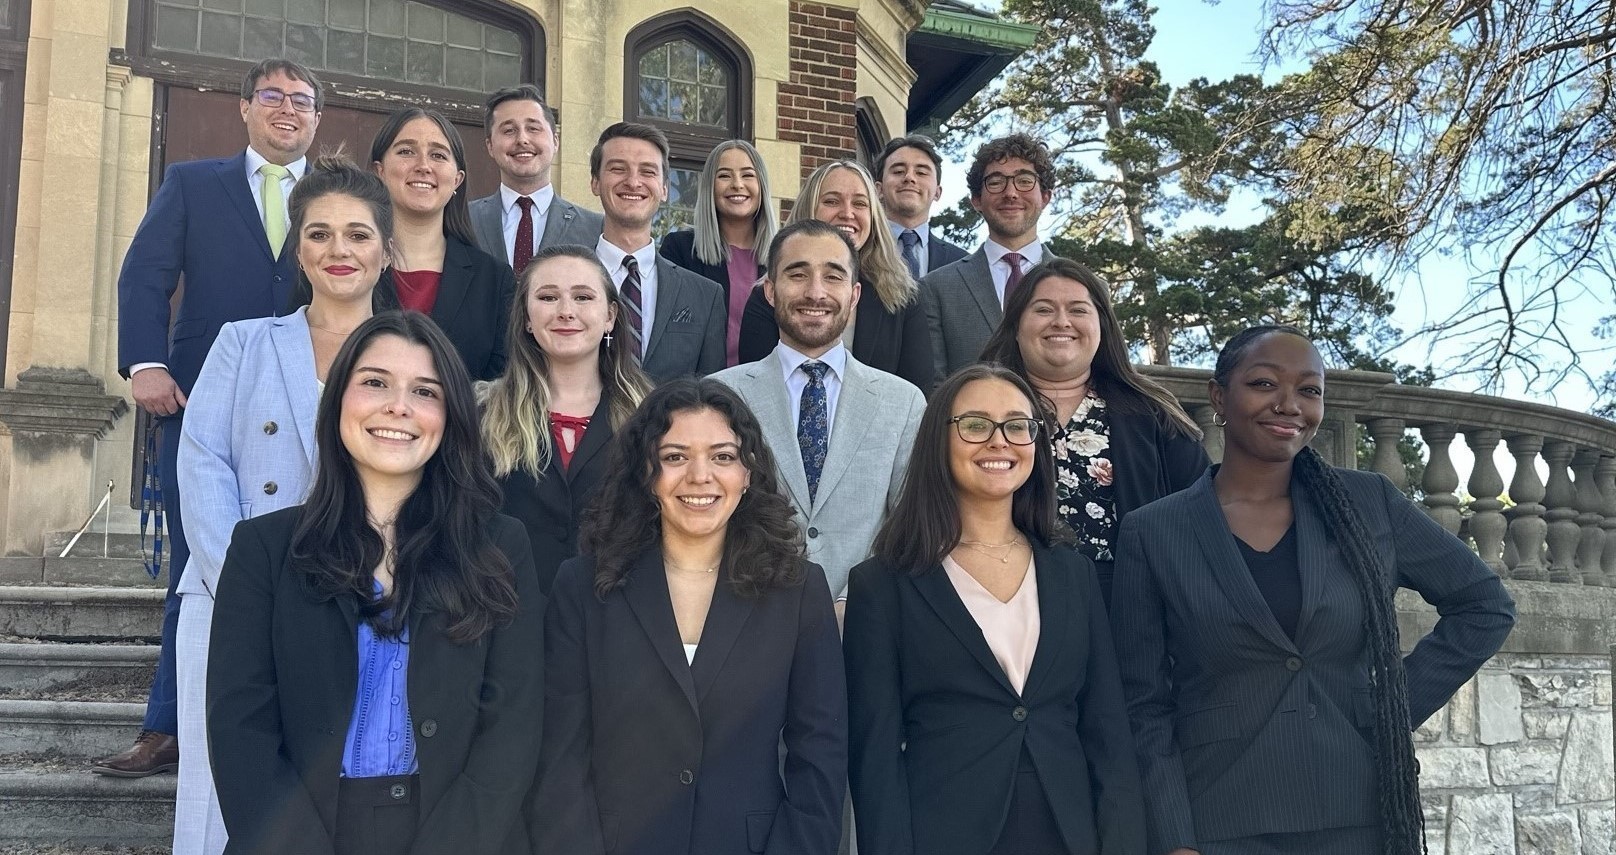 18 members of the Mock trial team stand on the steps in front of a stone building